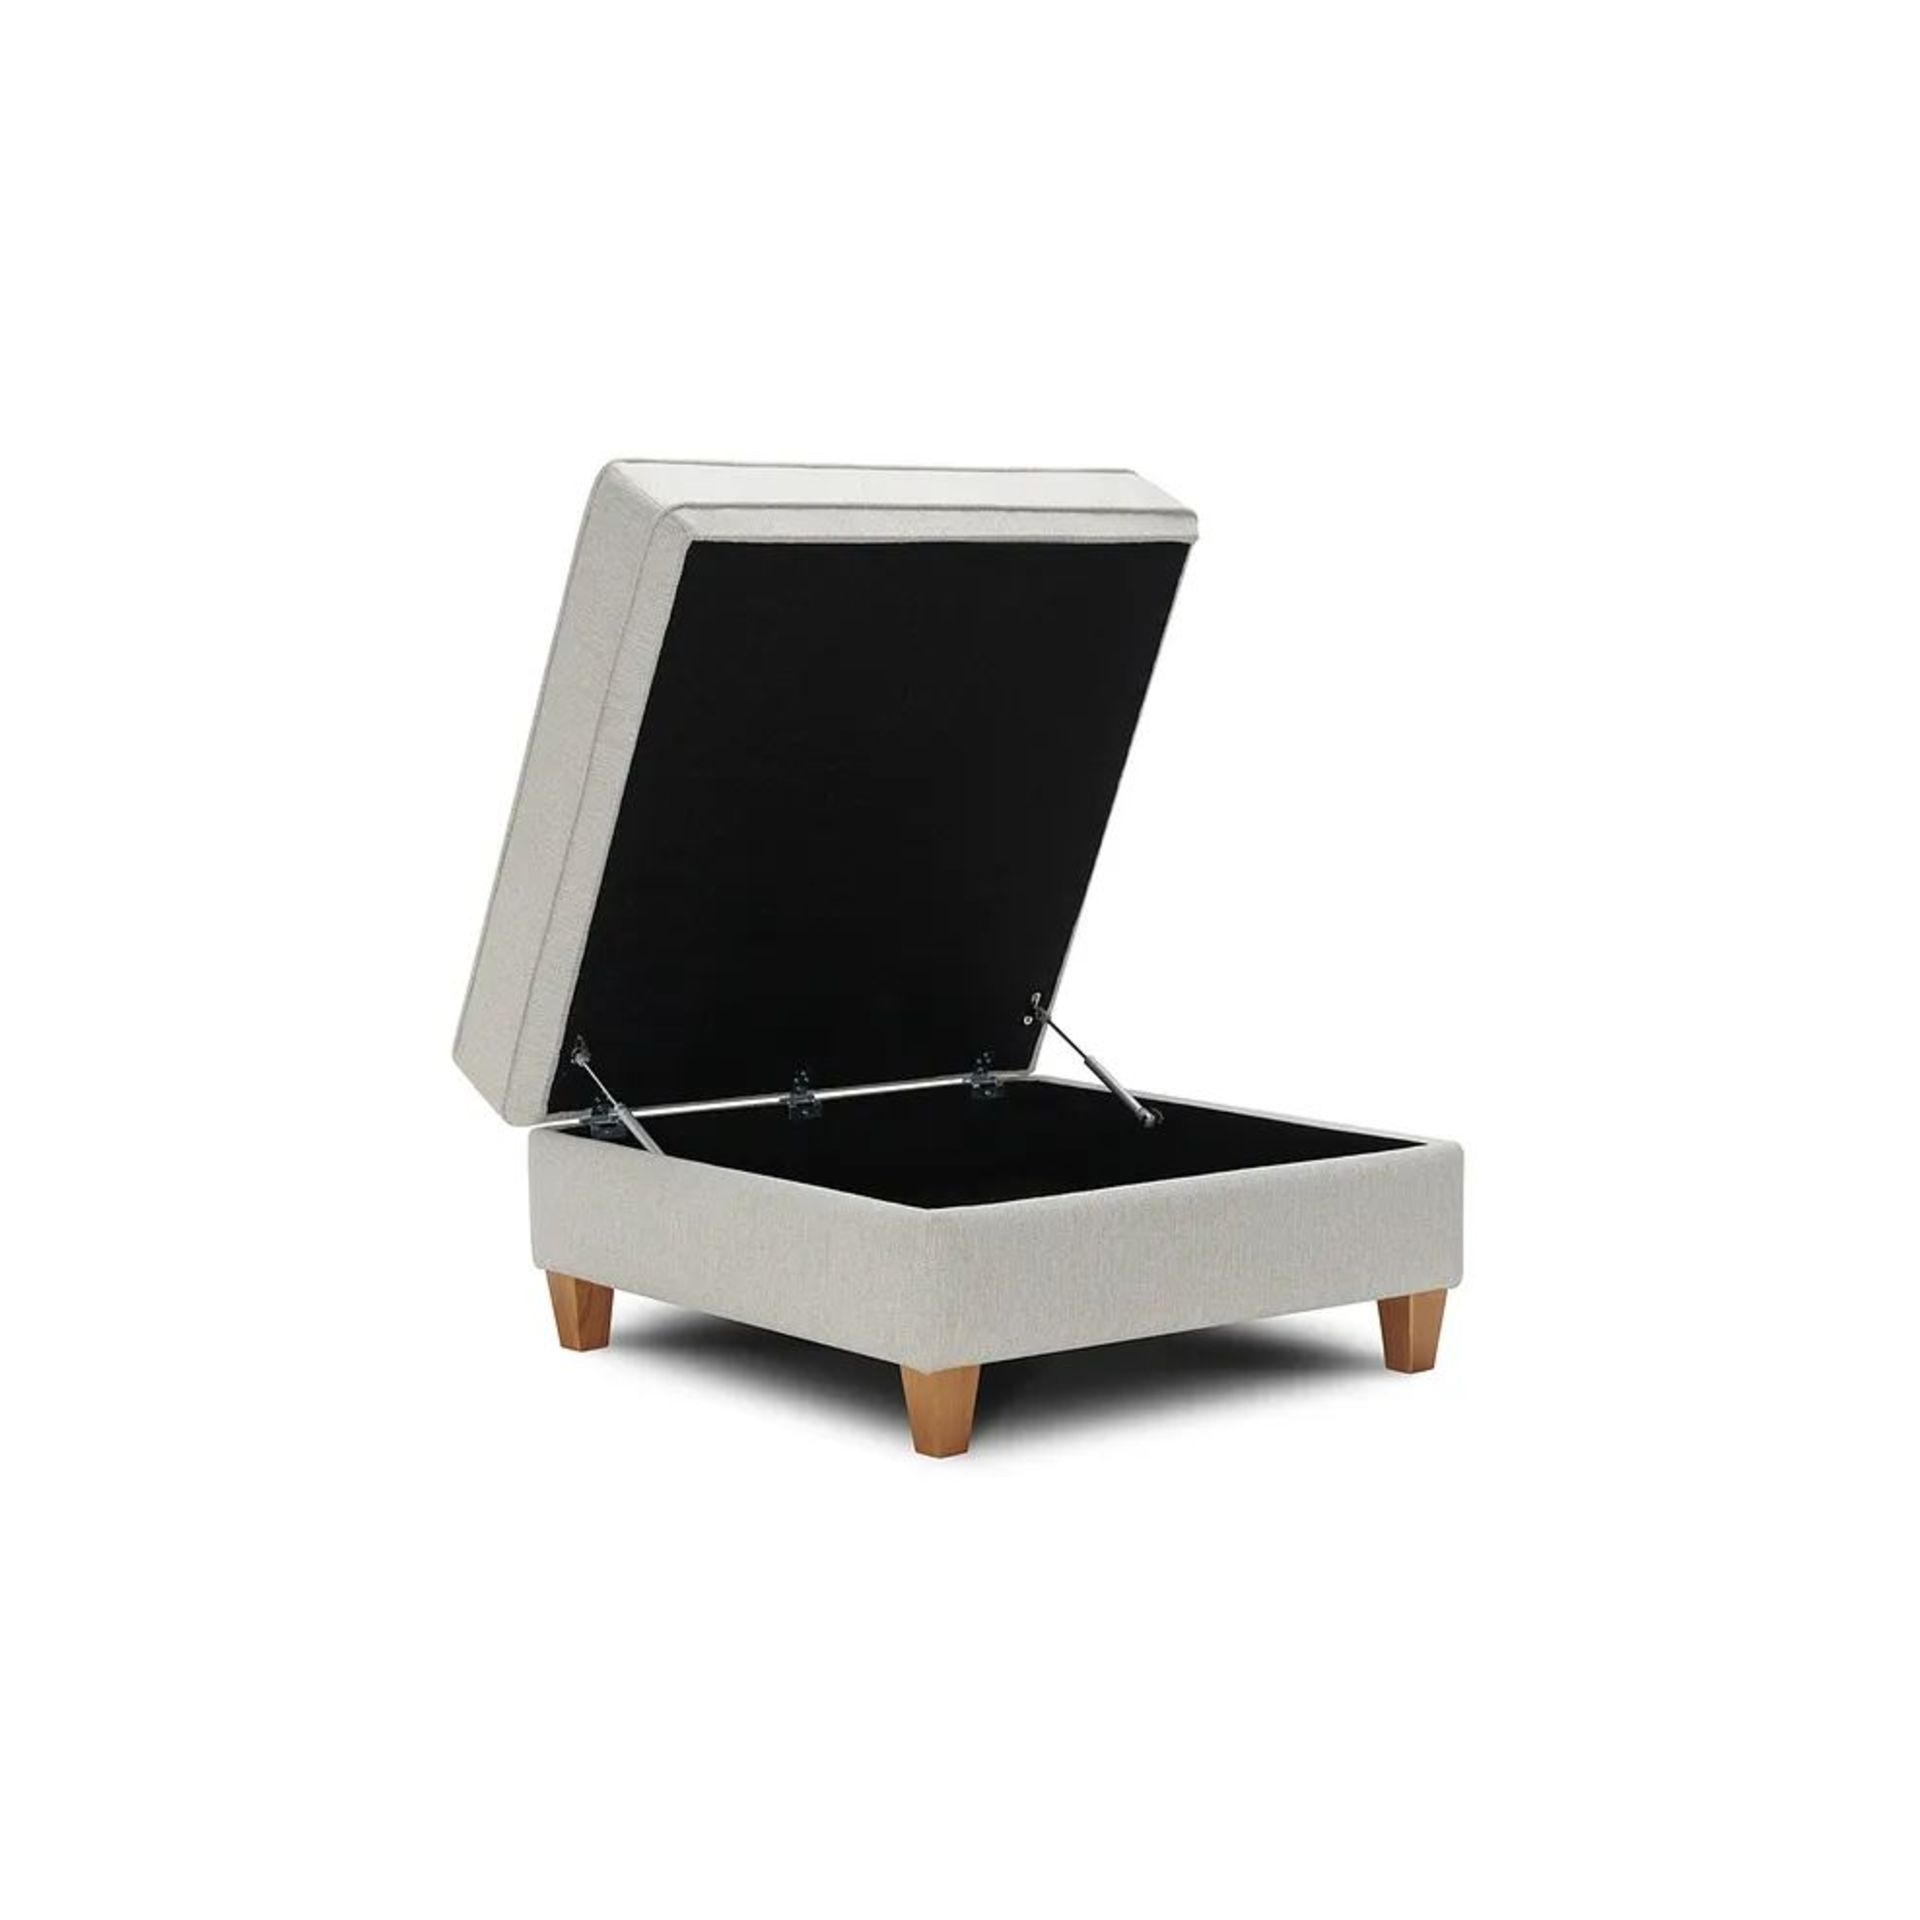 BRAND NEW INCA Large Storage Footstool - SILVER FABRIC. RRP £529. Our large Inca storage footstool - Image 3 of 7